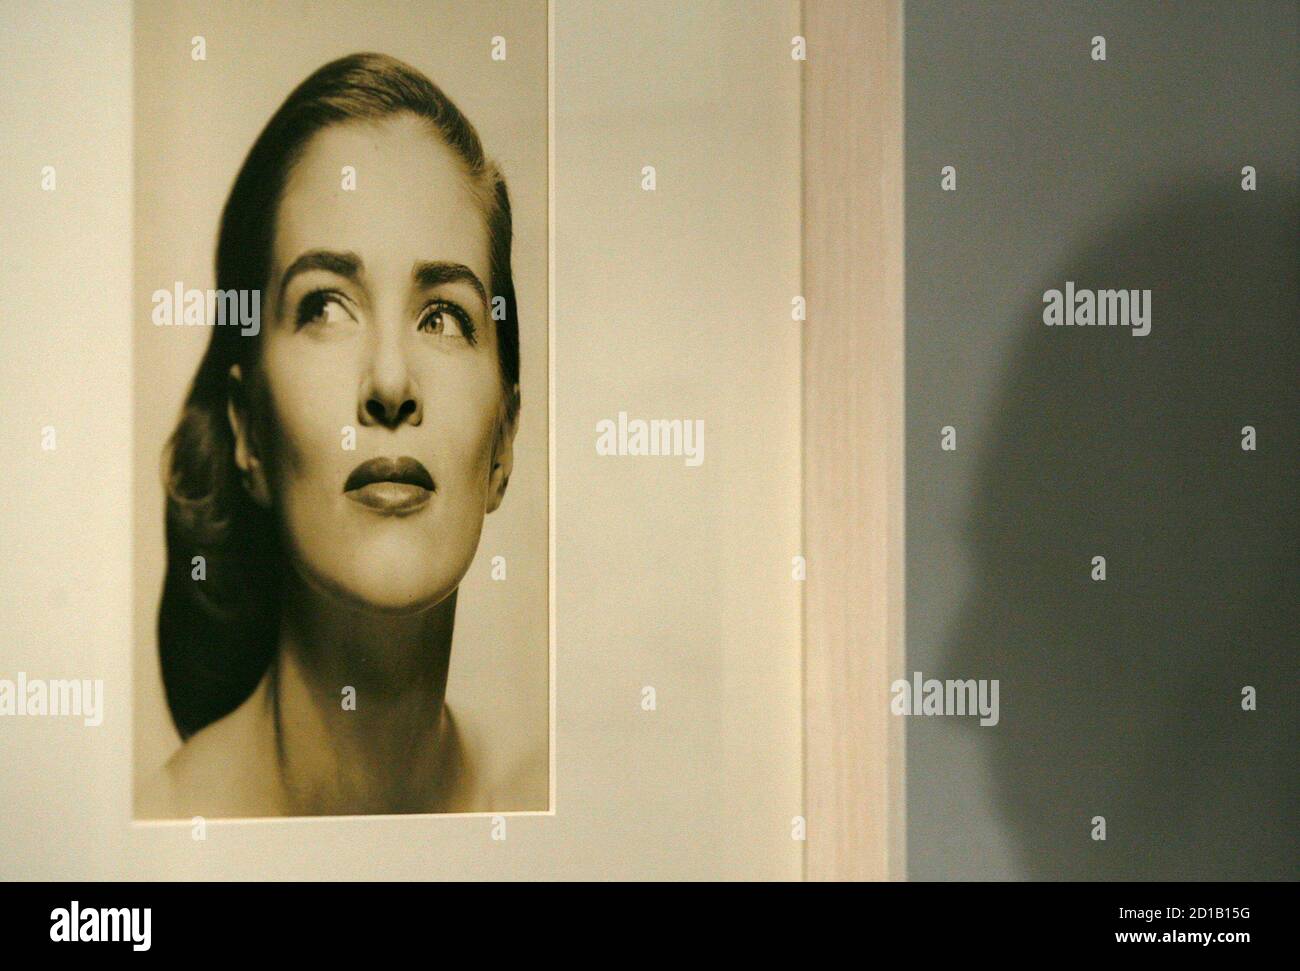 A visitor's shadow is cast beside a photograph by Richard Avedon of model Anne Theophane Graham during the exhibition 'Theo by Richard Avedon' in Rome January 31, 2009. Miniature stills of the American model posing in jeweled Dior gowns or a Balenciaga jacket are among dozens of previously unseen photos by famed photographer Avedon that went on display in Rome. The mostly black and white fashion shoot frames were found in an old trunk belonging to the late model.  REUTERS/Alessia Pierdomenico (ITALY) Stock Photo